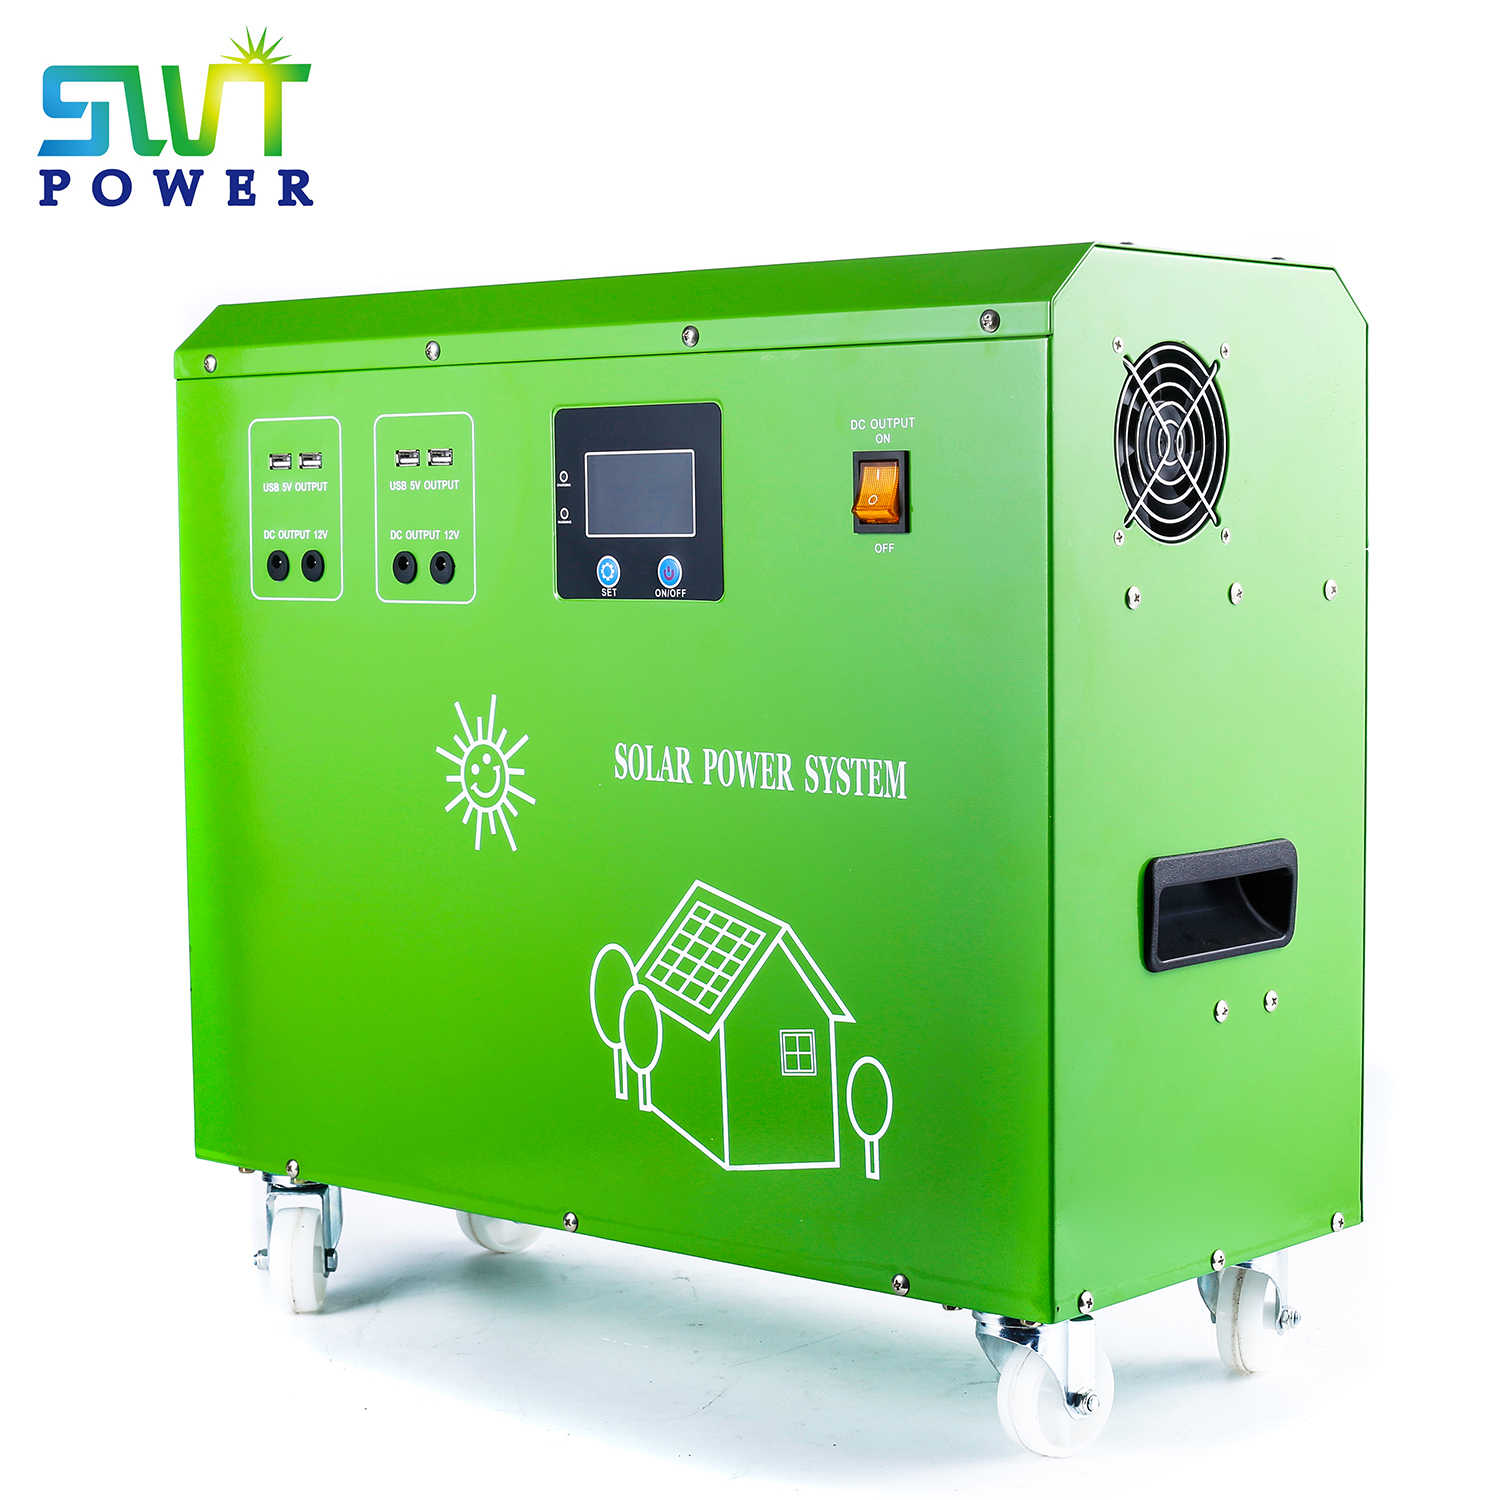 all-in-one-solar-power-system-solar-portable-equipment